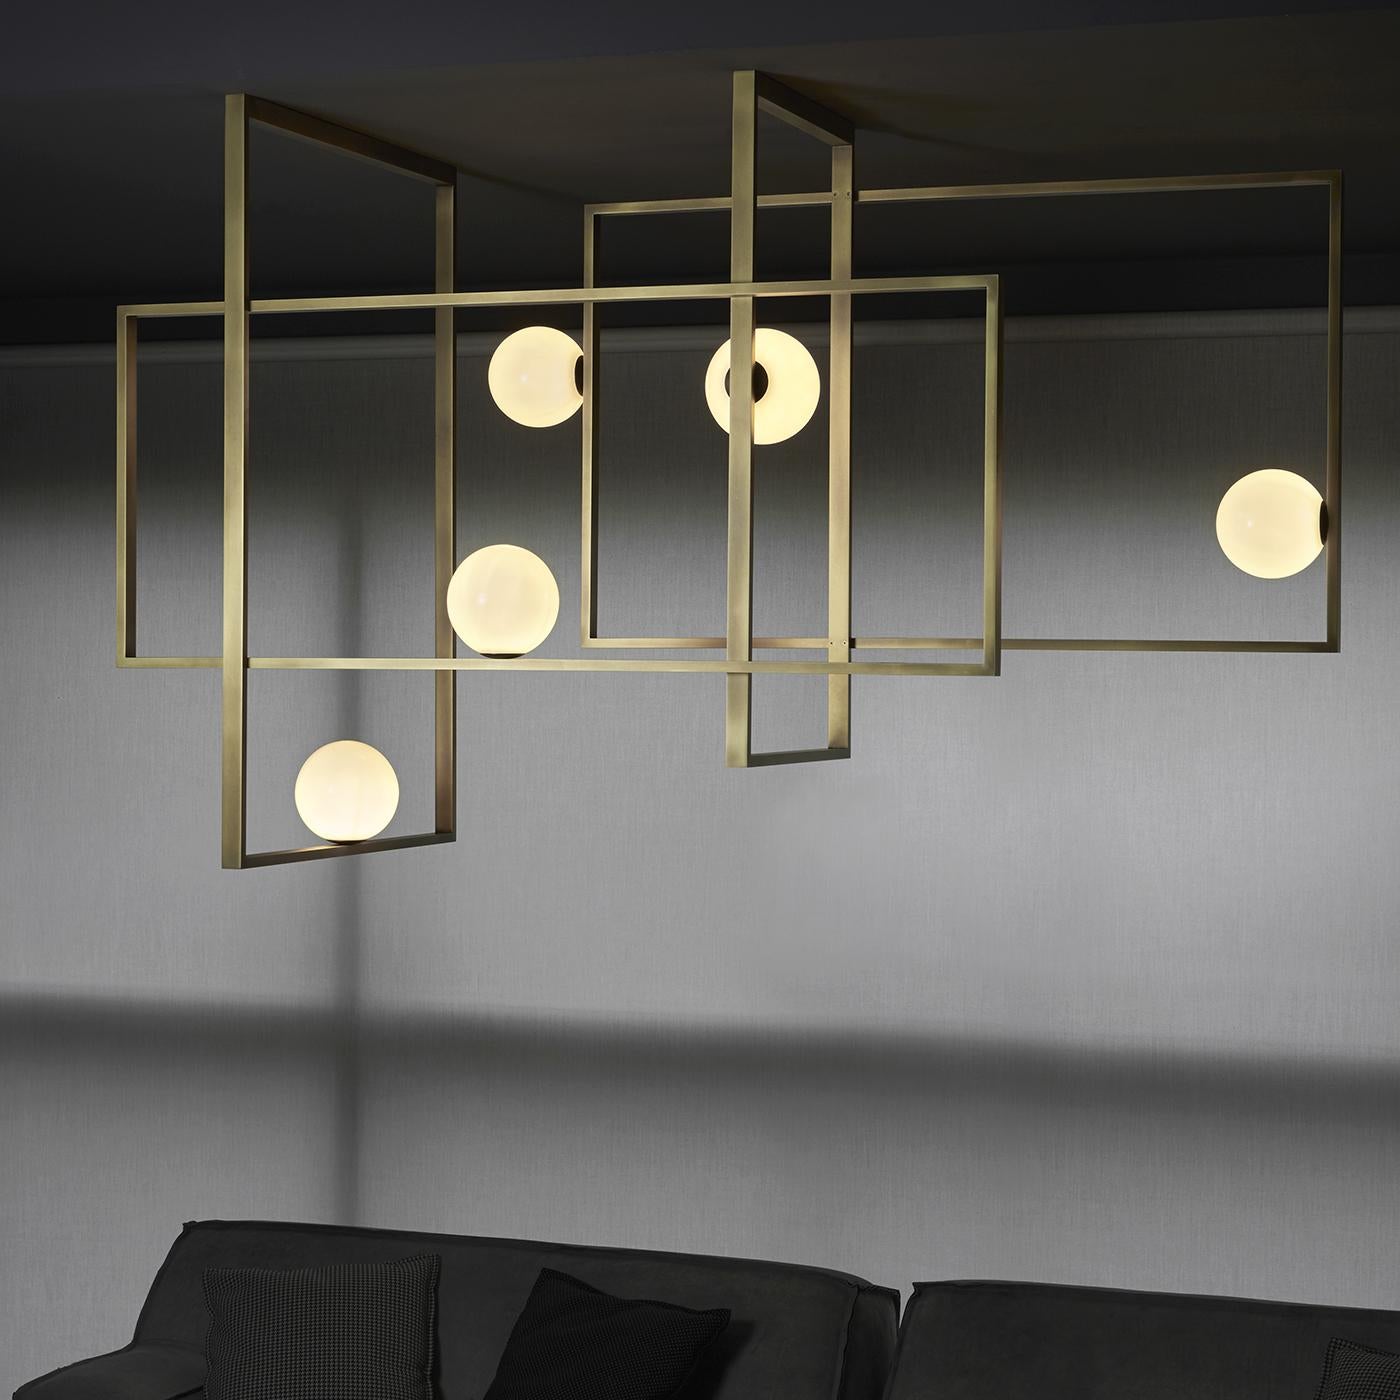 This striking chandelier features five mouth-blown Murano glass spheres in white. The elegant geometry of the metal structure is available with a burnished natural brass, polished black nickel, polished gold or matte black nickel finish. The wiring